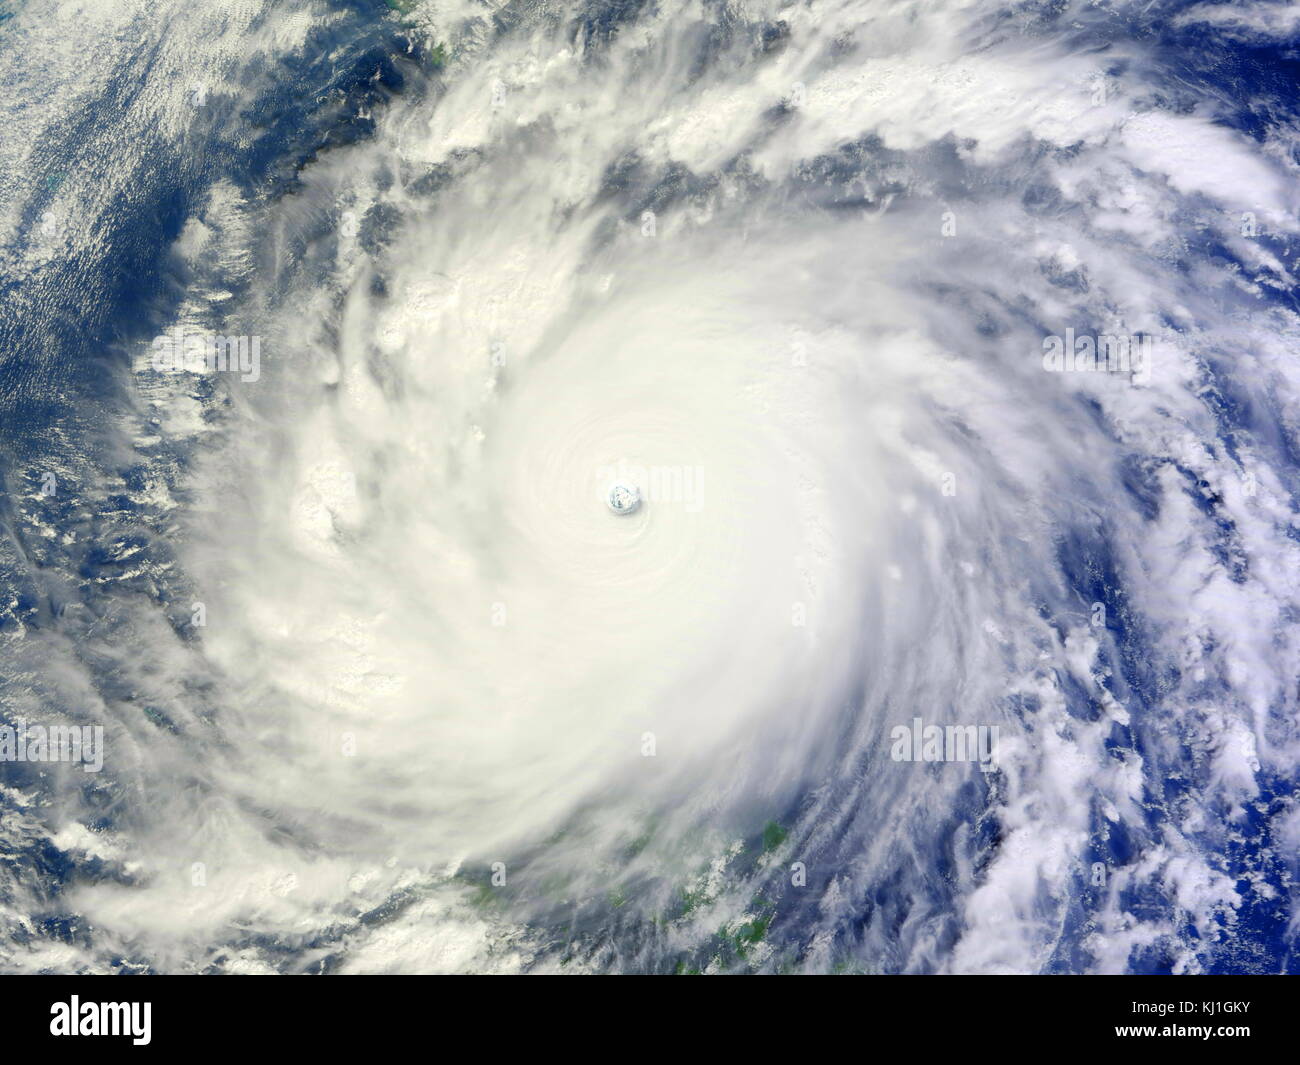 Typhoon Megi known in the Philippines as Super Typhoon Juan, was one of the most intense tropical cyclones on record. Megi, which means catfish in Korean, was the only super typhoon in 2010. Early on October 18, Megi made its first landfall over Luzon. By passing Luzon, Megi weakened but gradually regained strength in the South China Sea, before weakening and losing its eye wall in the Taiwan Strait. Stock Photo